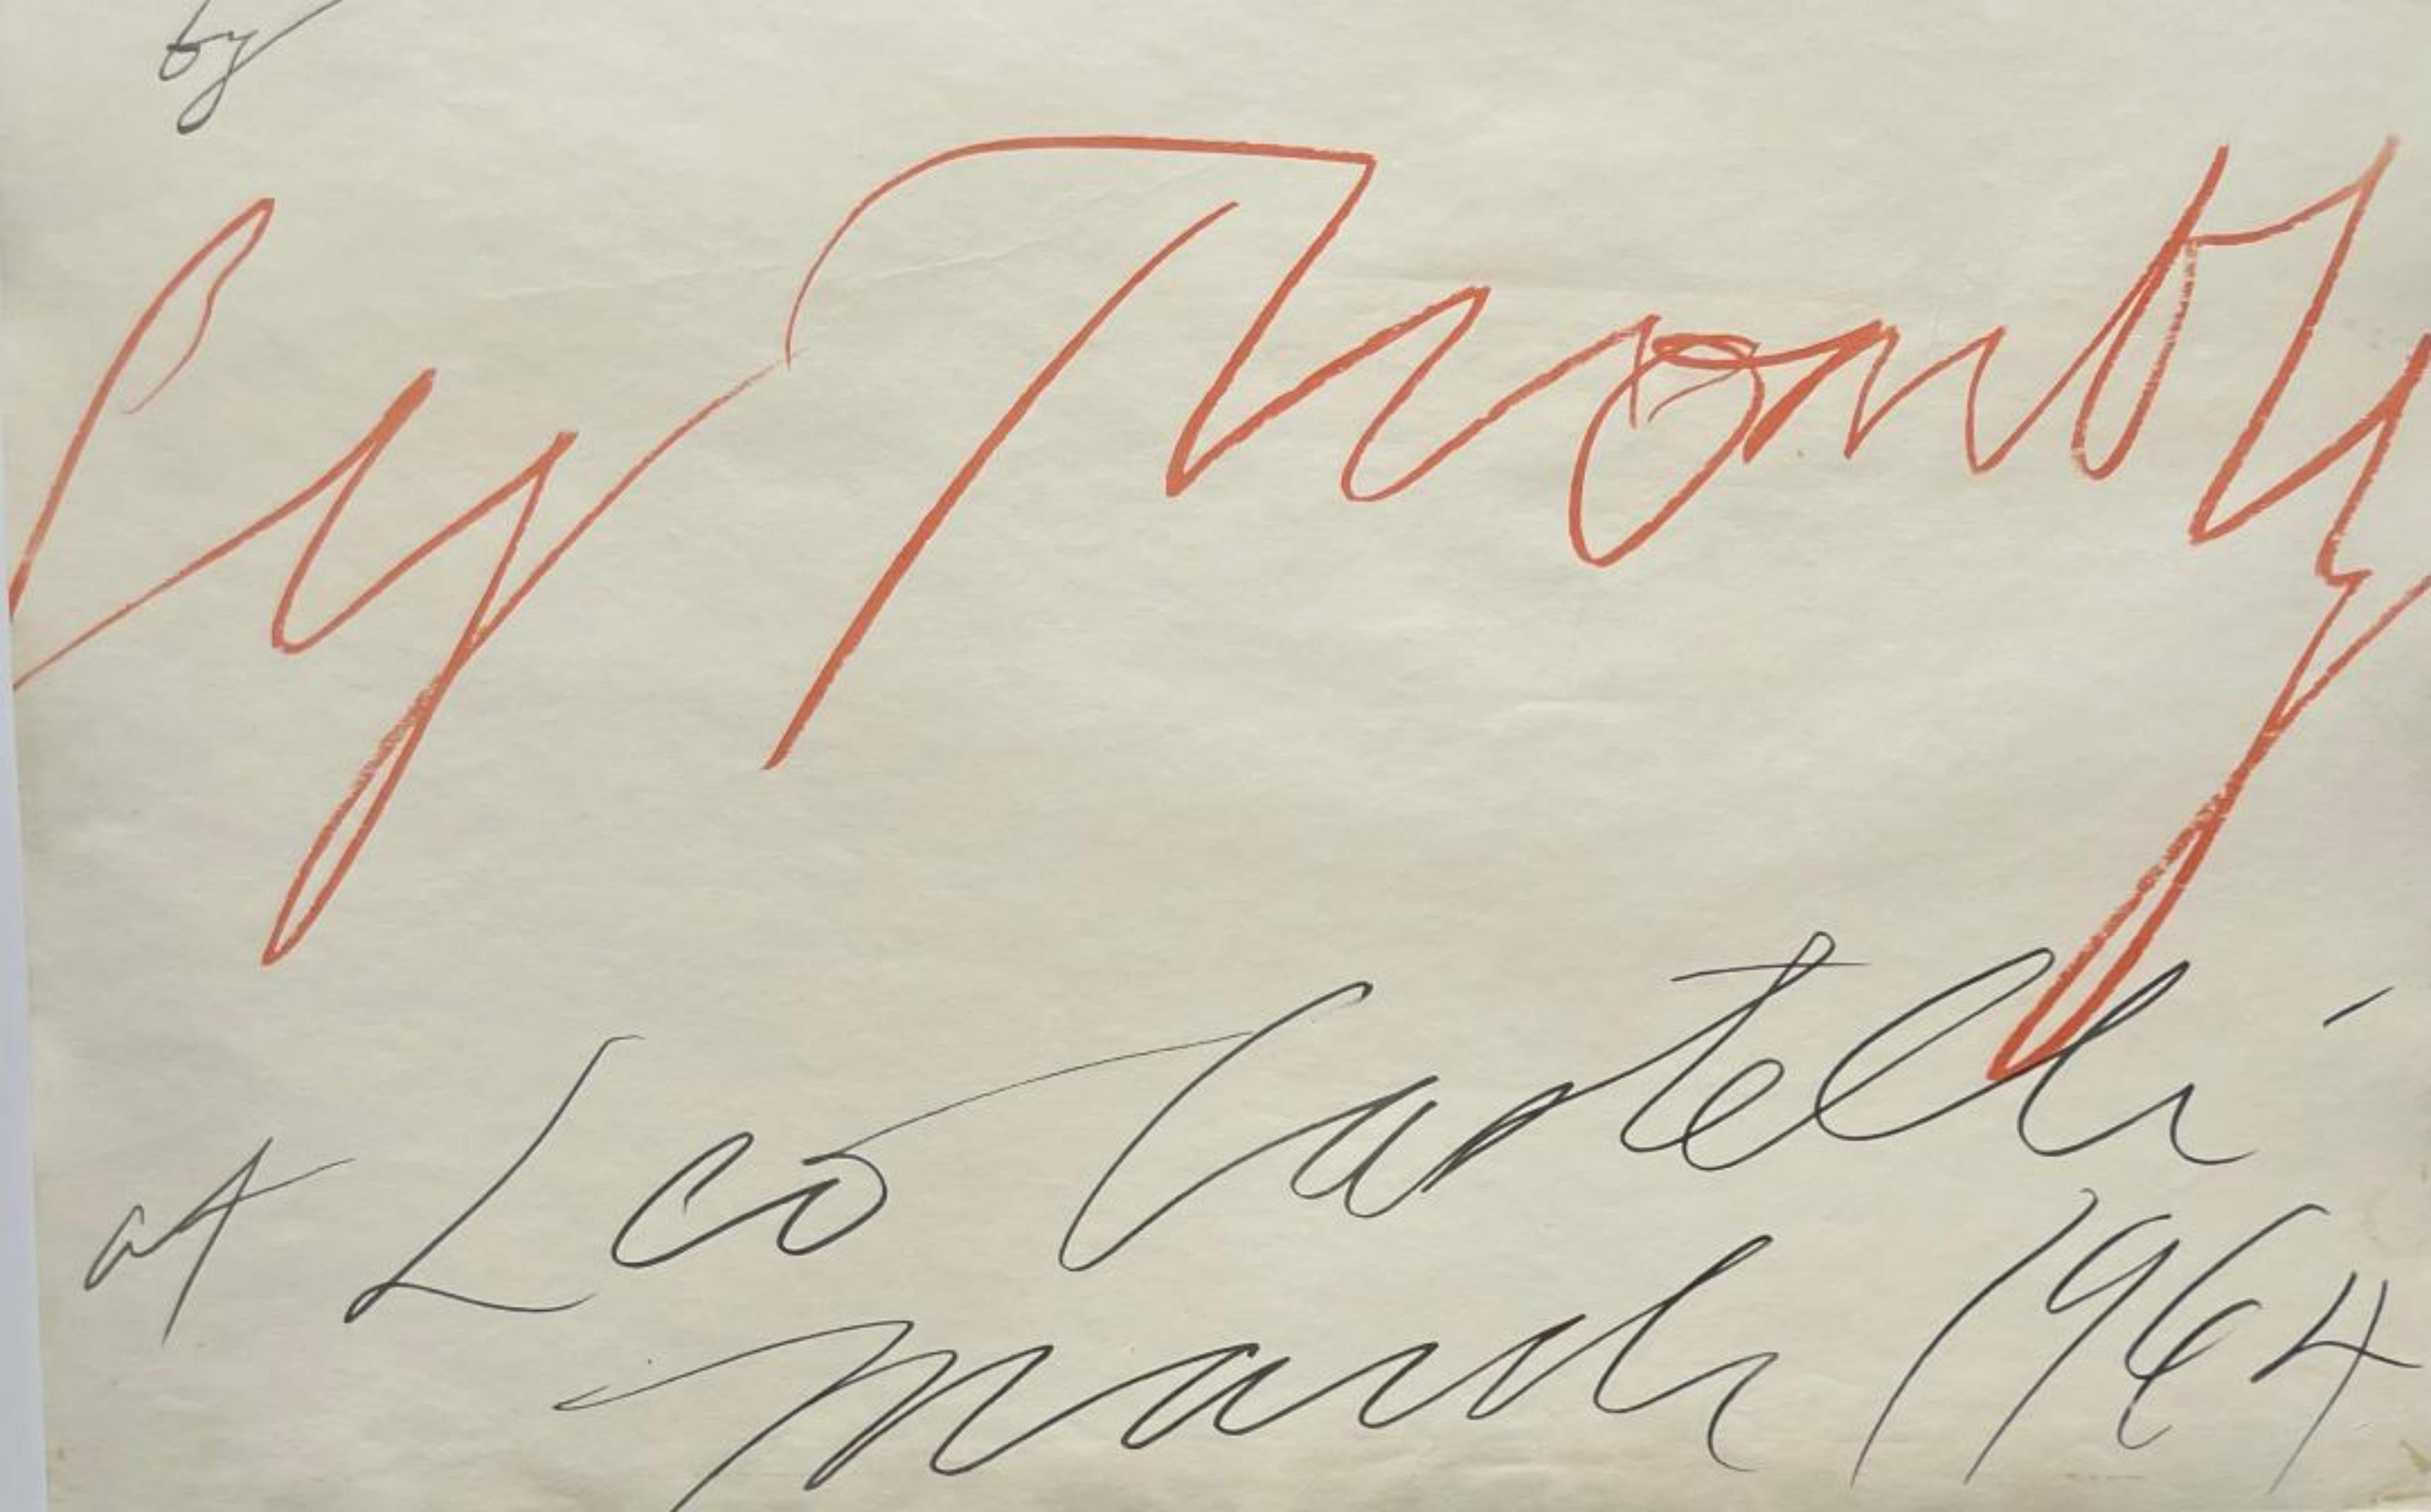 Cy Twombly
Cy Twombly at Leo Castelli (Hand Signed), 1964
Offset lithograph exhibition announcement (hand signed by Cy Twombly)
27 × 19 1/2 inches
Boldly signed on the front by Cy Twombly
Published by Leo Castelli Gallery, 4 East 77th Street, New